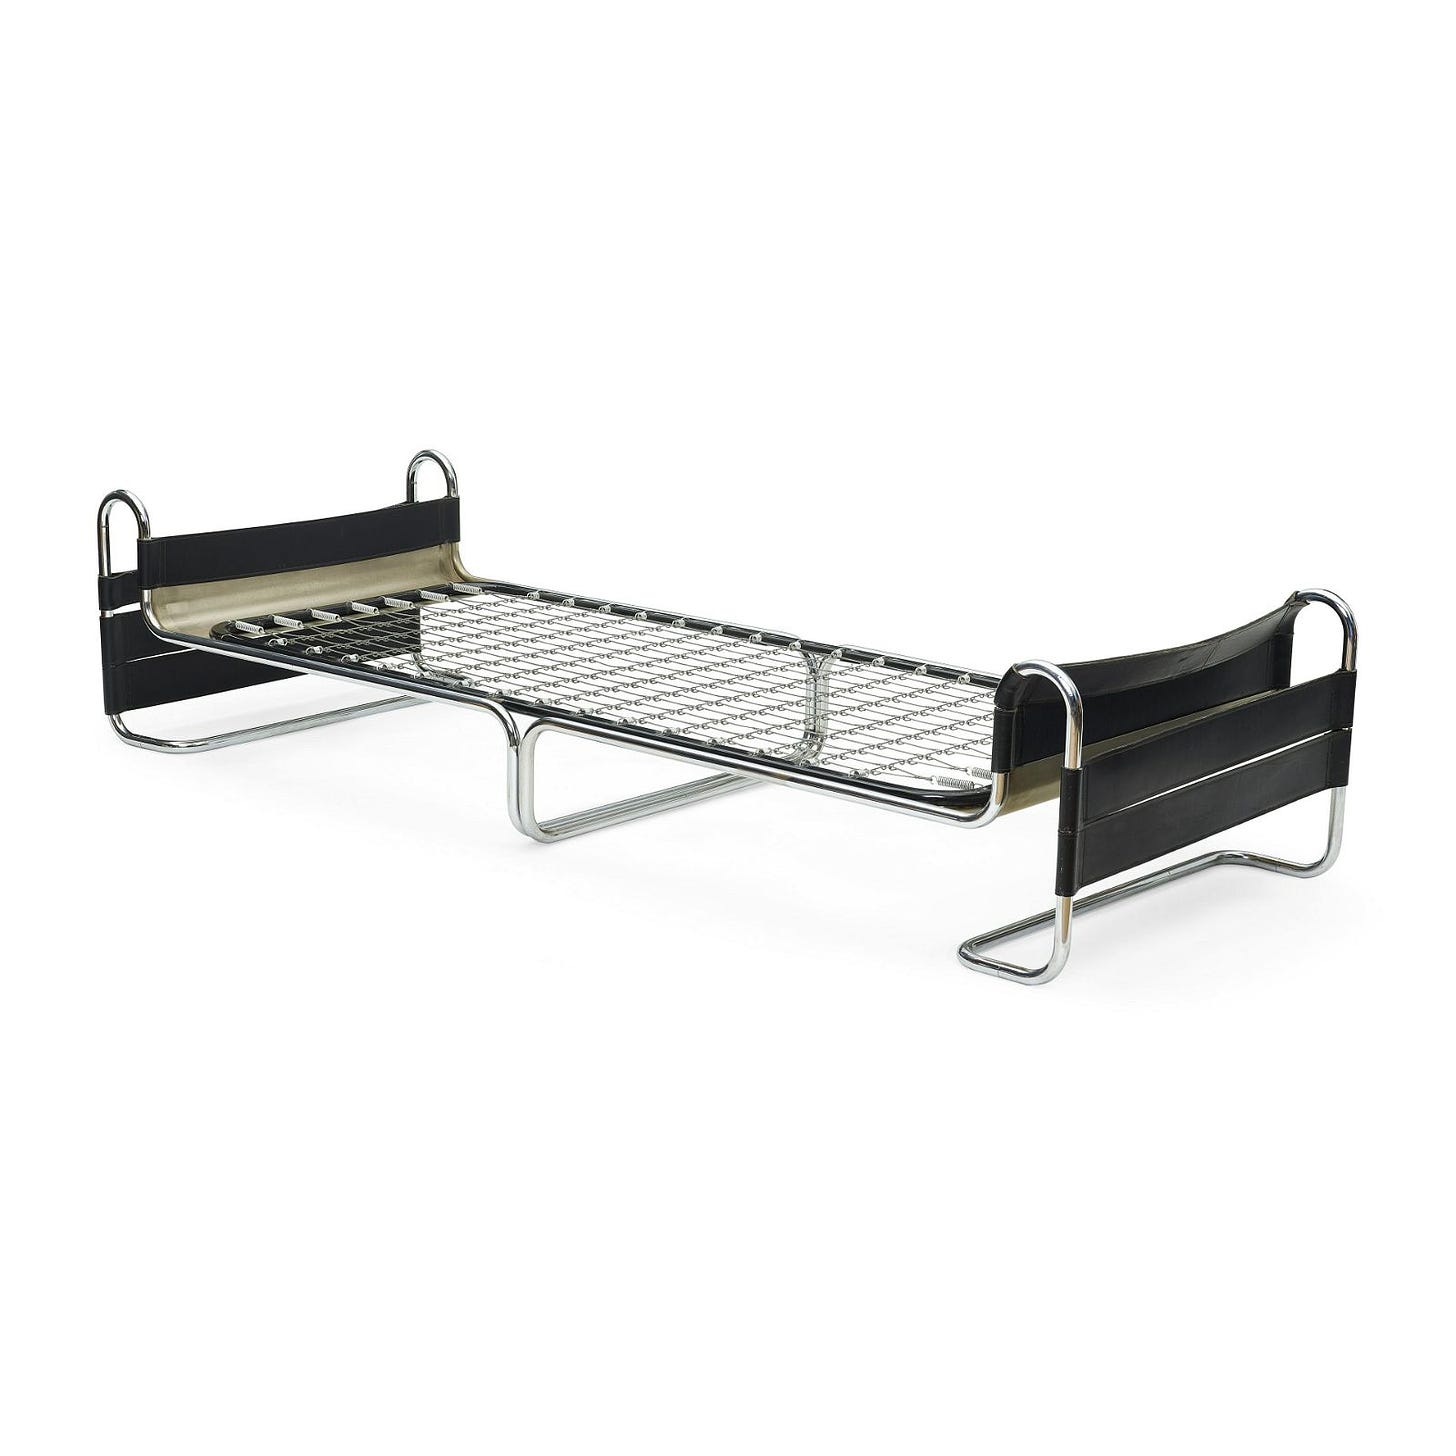 MARCEL BREUER (1902-1981) Daybedcirca 1970for Thonet, leather, chromed metal and enameled steelh...